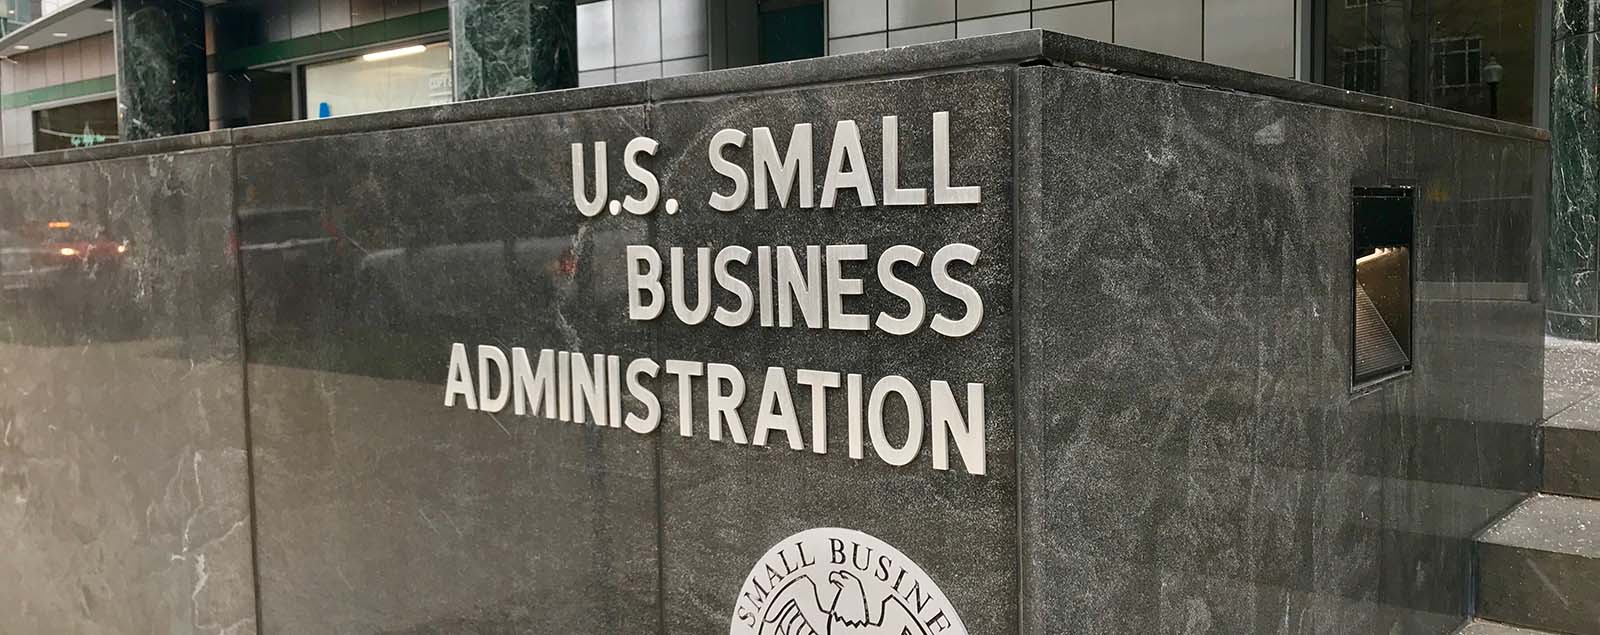 The U.S. Small Business Administration sign is in front of a building offering Proposal Support for businesses seeking assistance from the Federal Government.